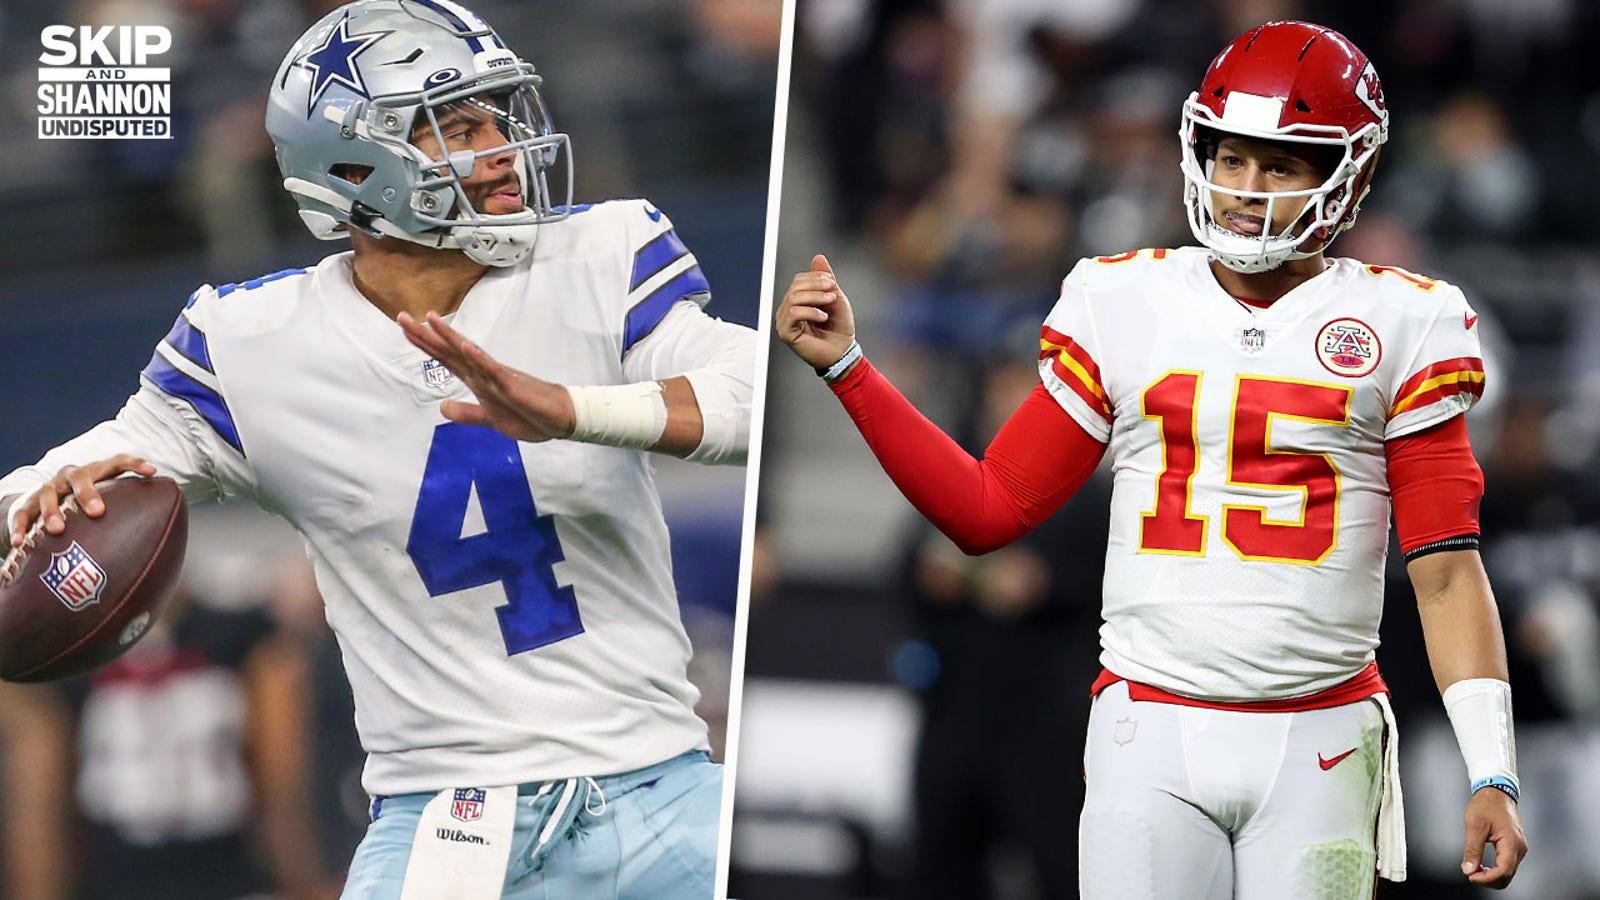 Skip Bayless: I'm picking my Cowboys to beat the Chiefs; I like their character, unity and swagger ' UNDISPUTED